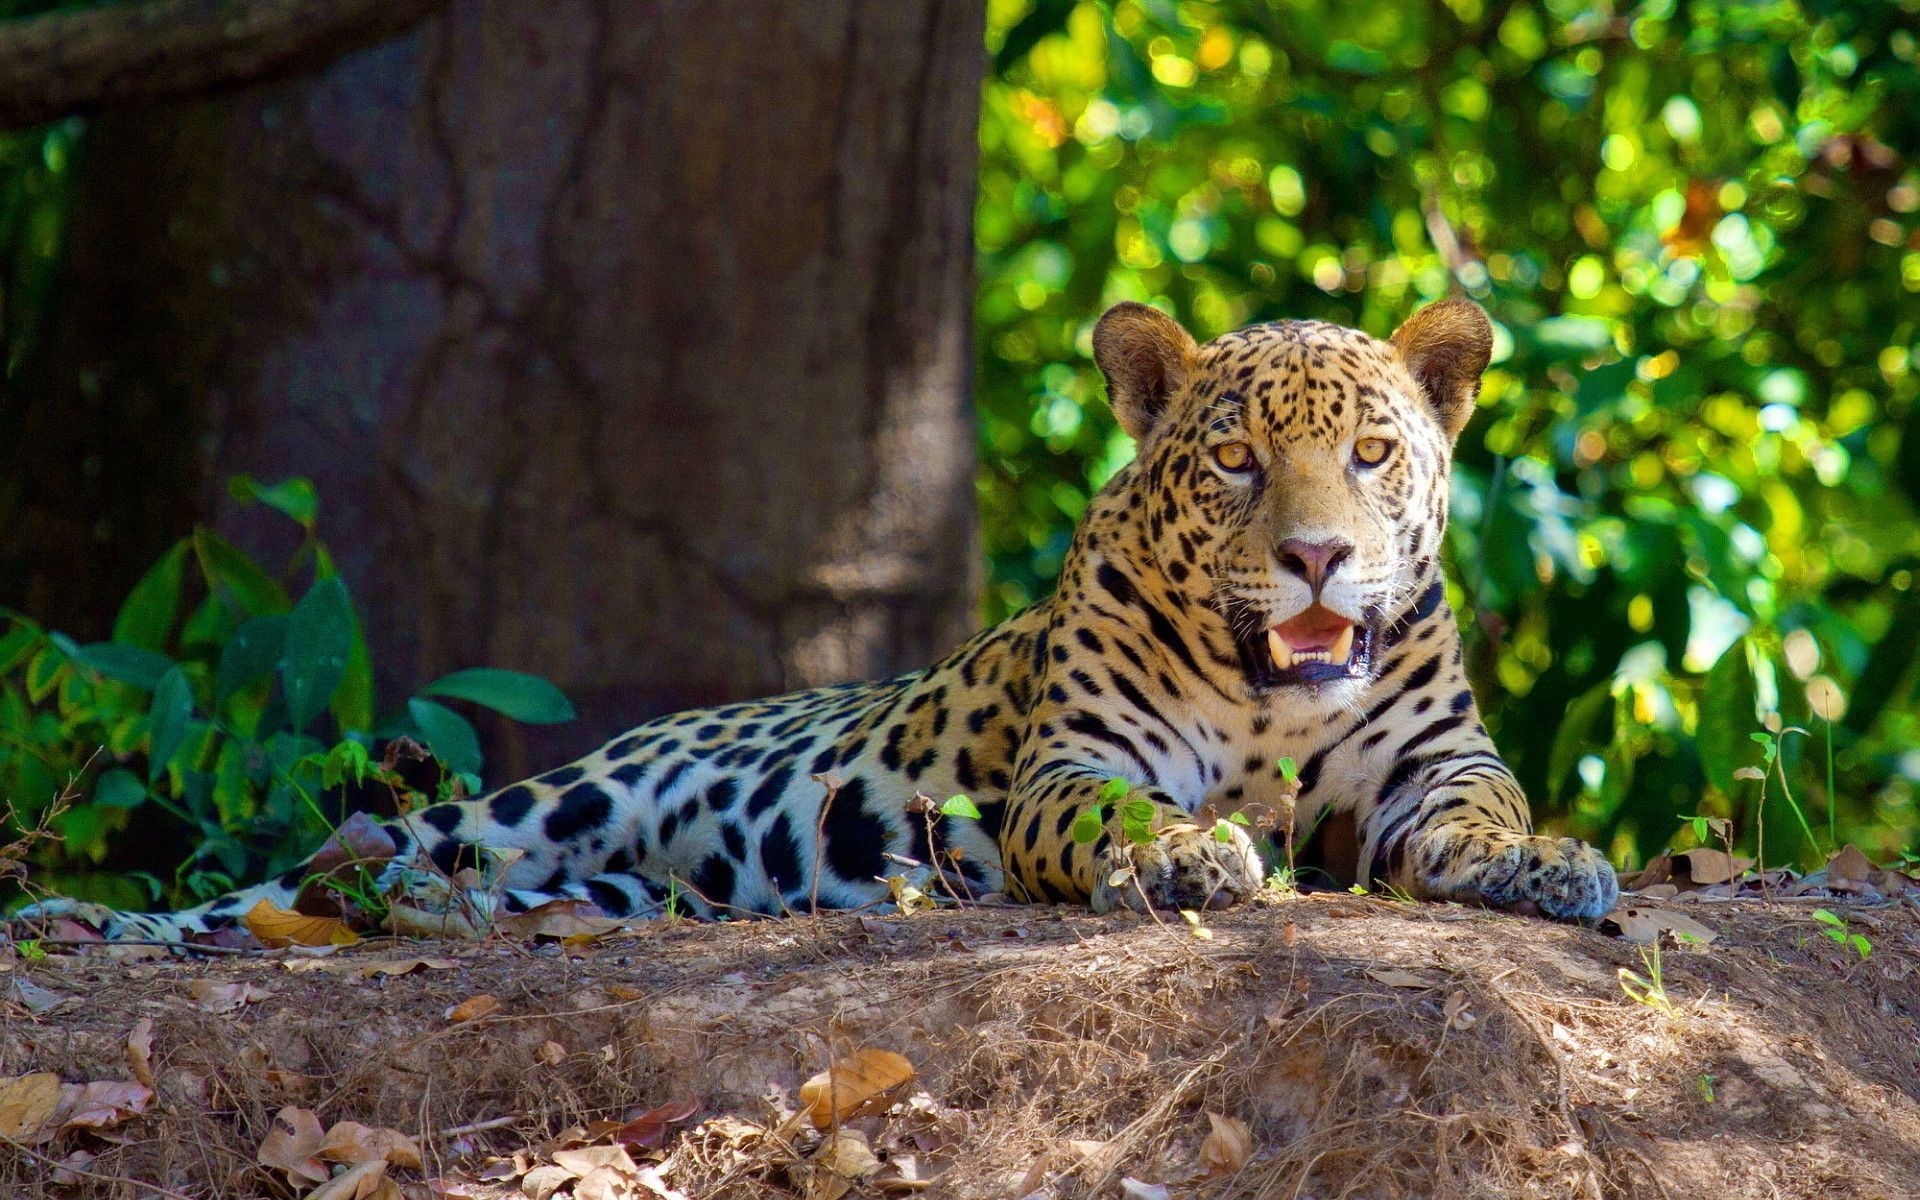 Free Download Amazon Forest Wallpapers, - Jaguar In The Amazon Rainforest - HD Wallpaper 